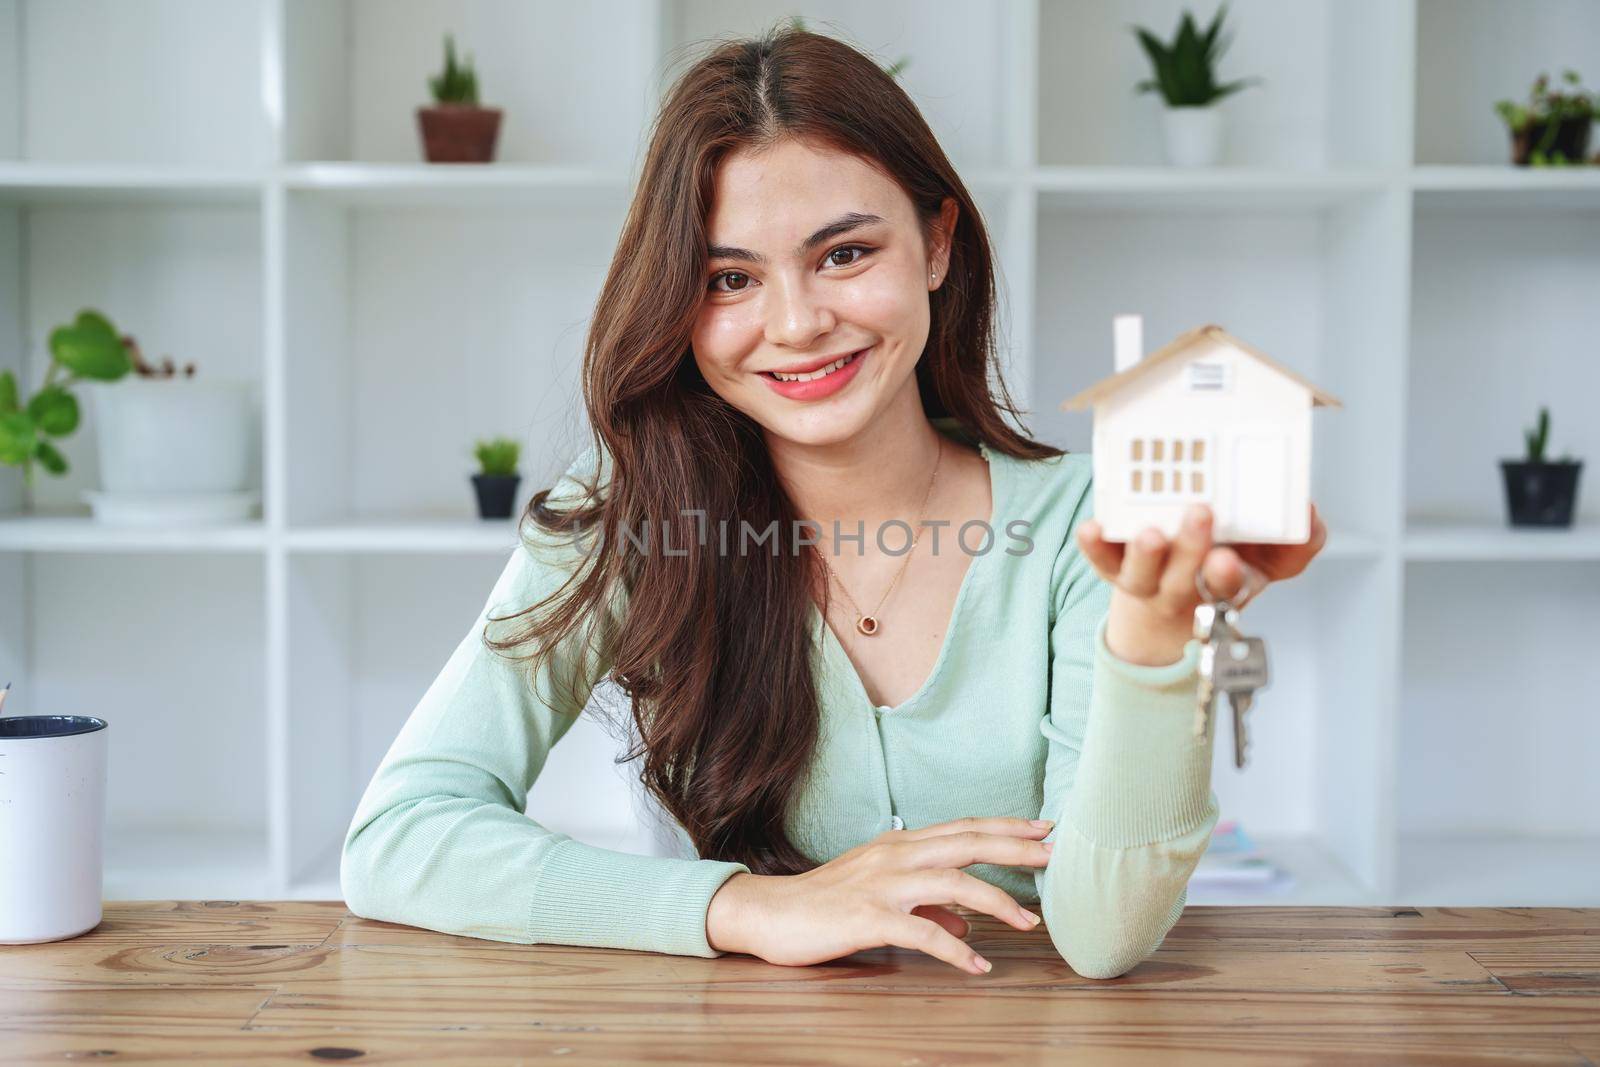 The customer holds the house model and keys by Manastrong